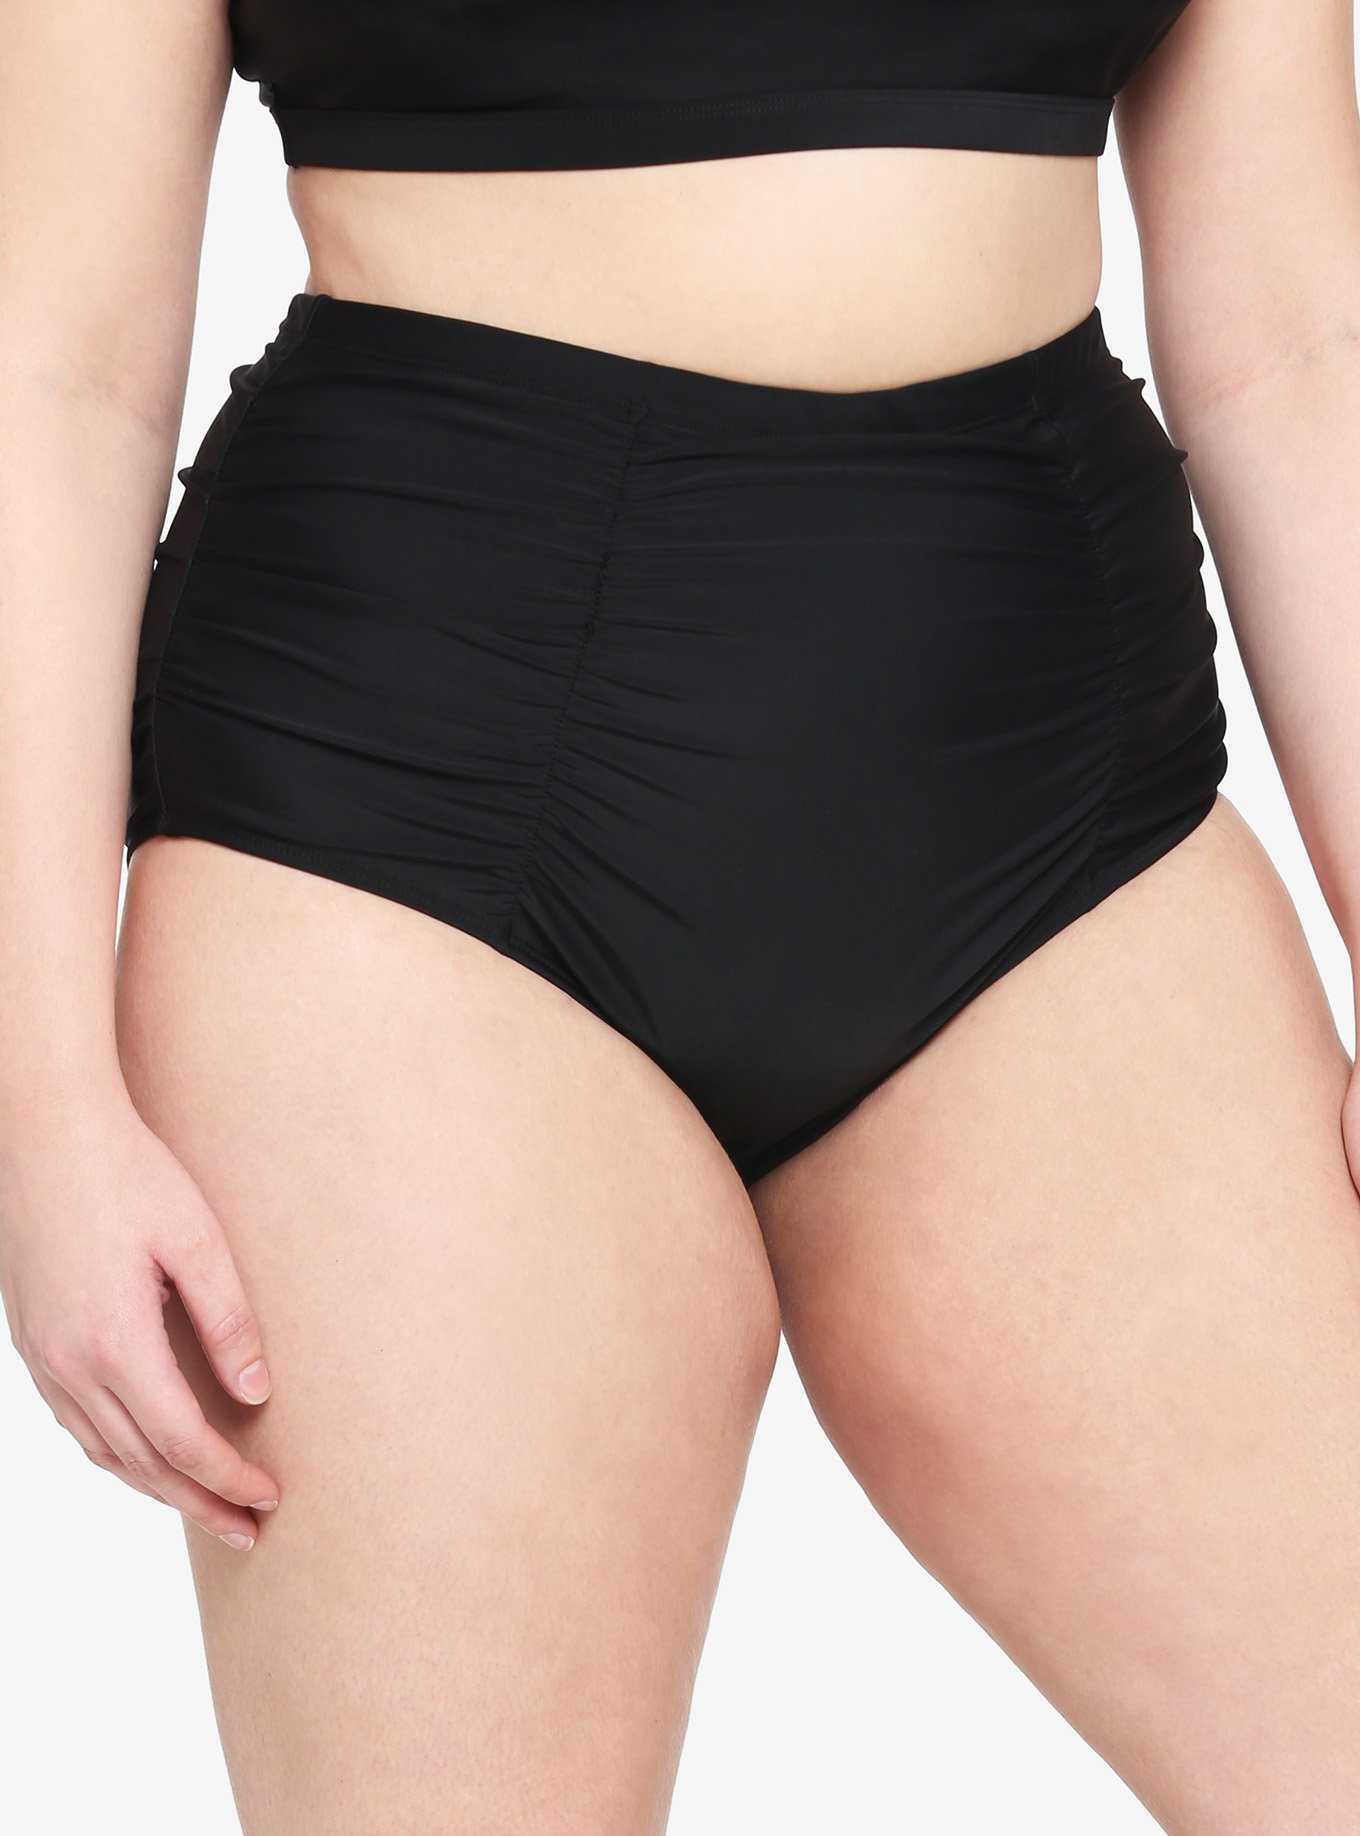 Black Ruched High-Waisted Swim Bottoms Plus Size, , hi-res